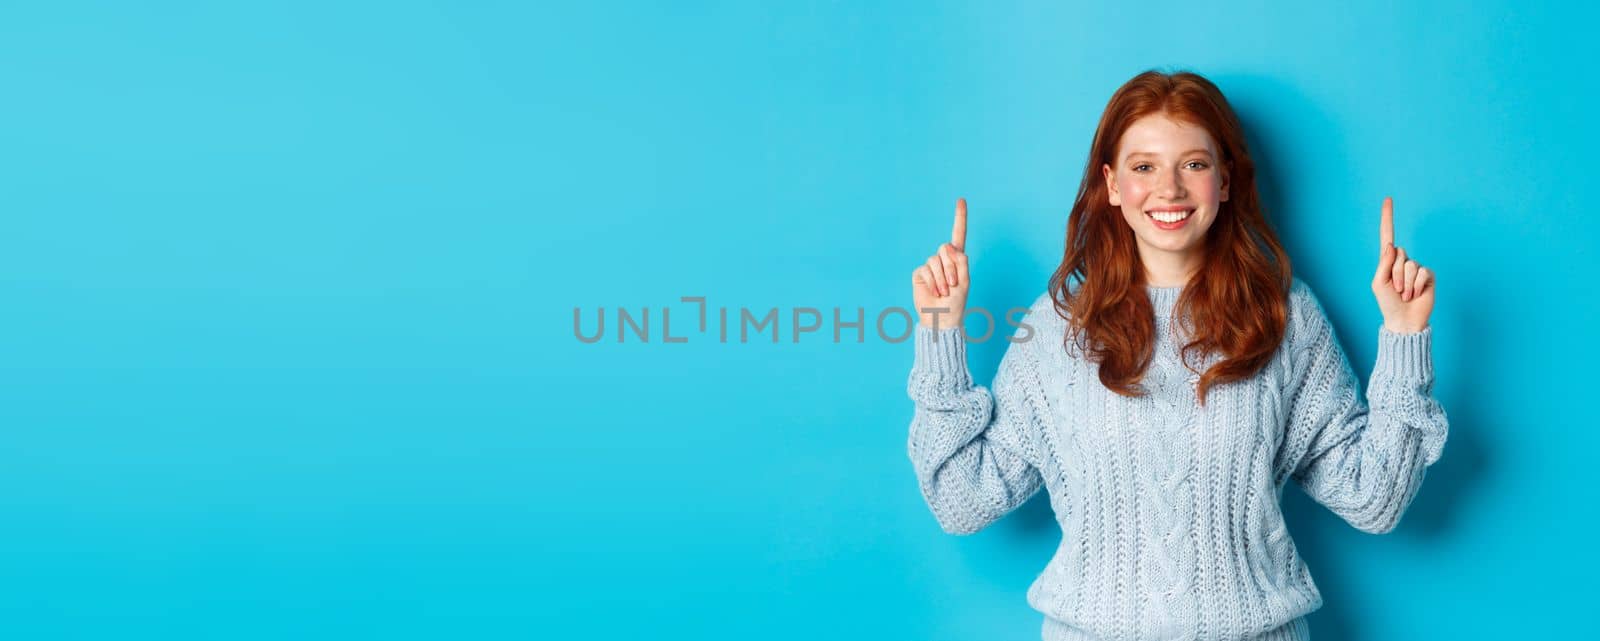 Winter holidays and people concept. Cheerful redhead girl in sweater pointing fingers up, showing logo banner and smiling, standing over blue background.